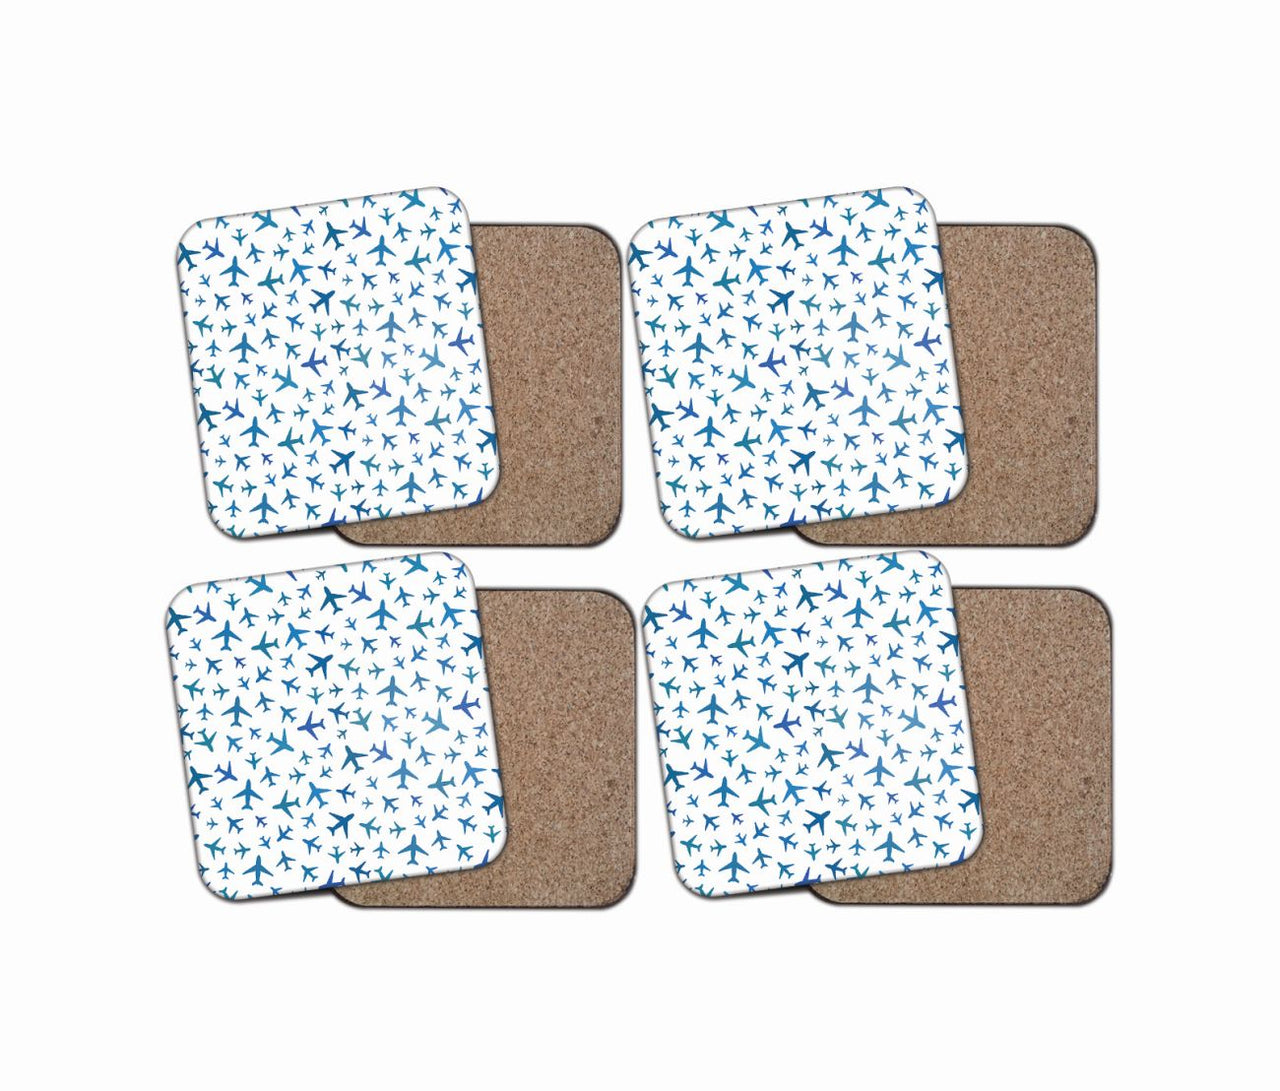 Many Airplanes White Designed Coasters